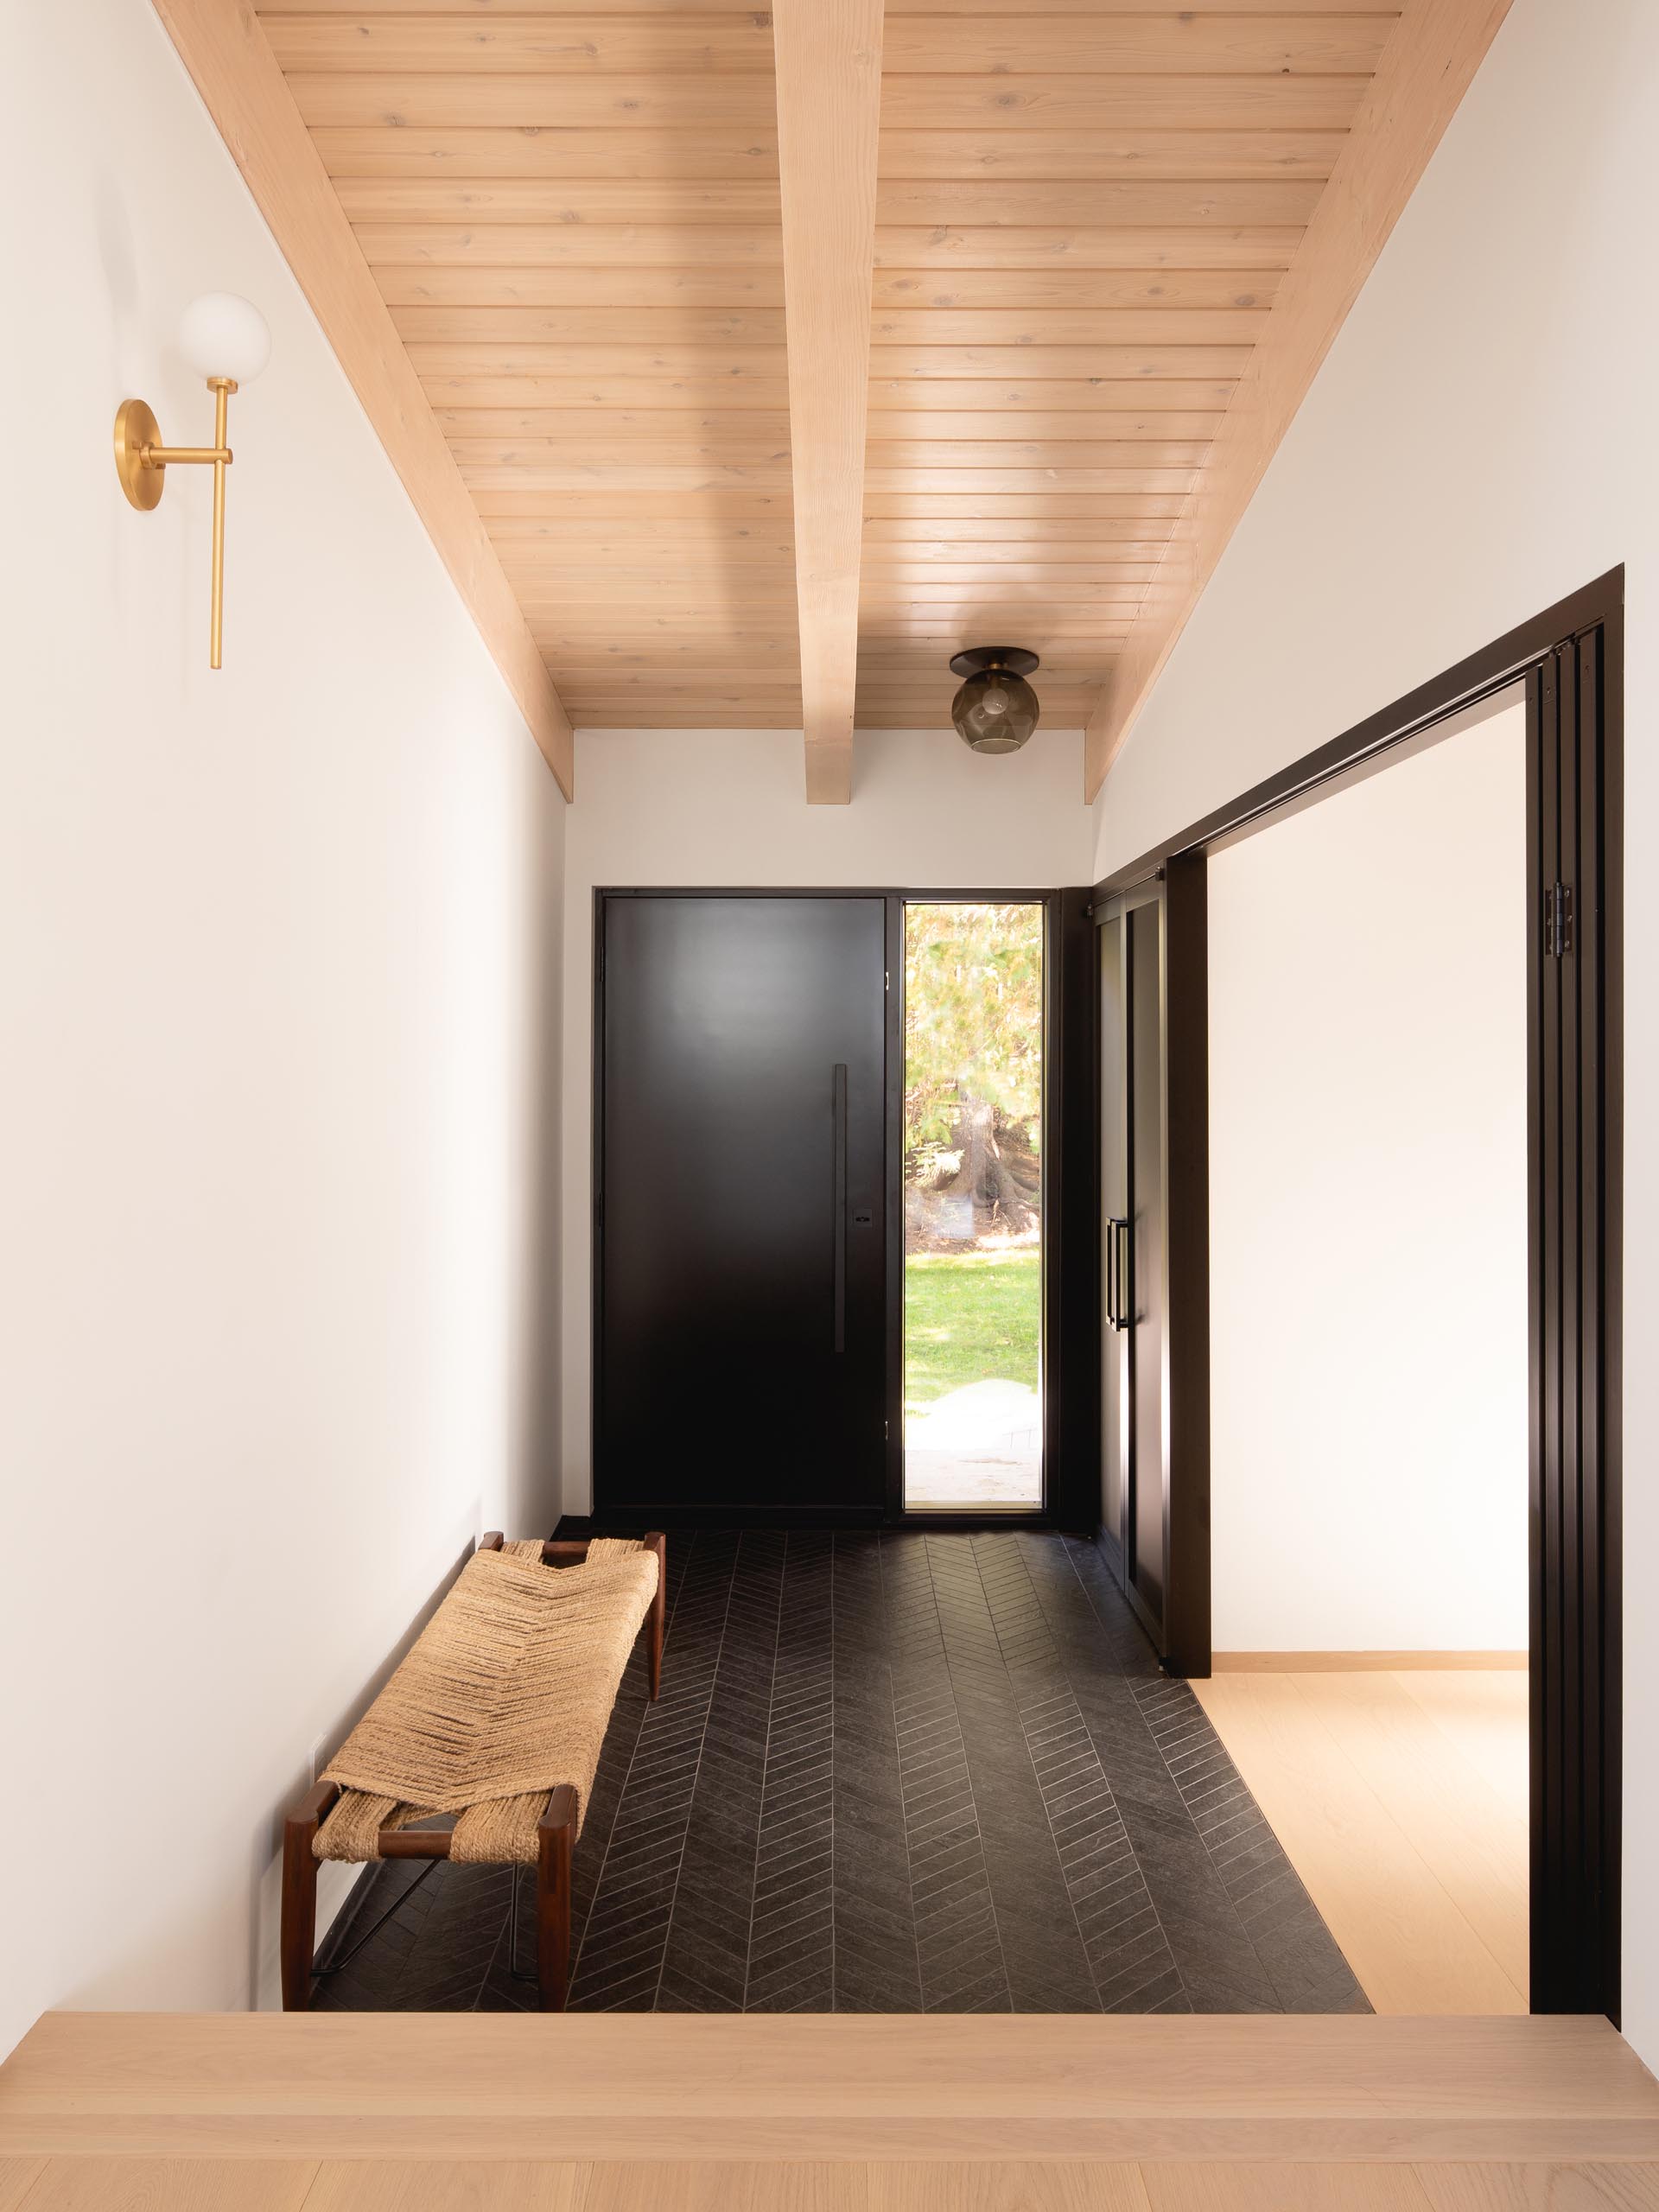 This modern entryway shows off a light wood ceiling, while the floor is a black tile with a chevron pattern.